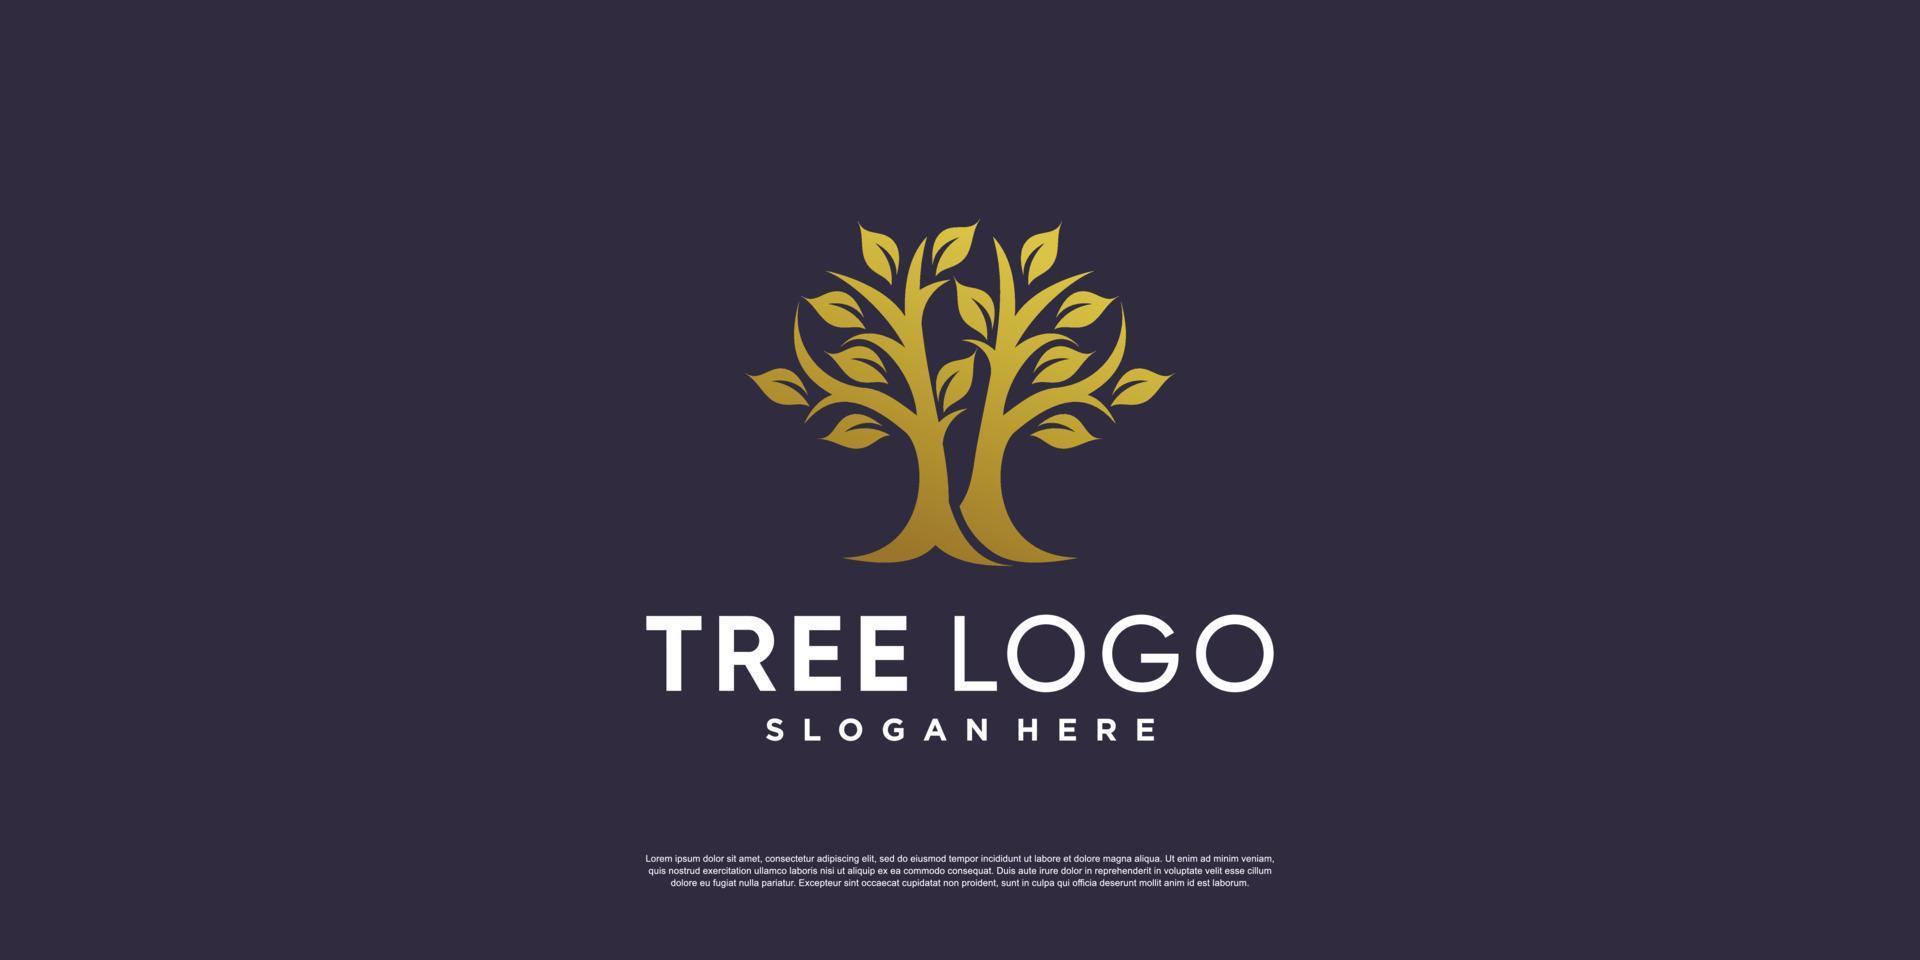 Golden tree logo with creative abstract element style Premium Vector part 3